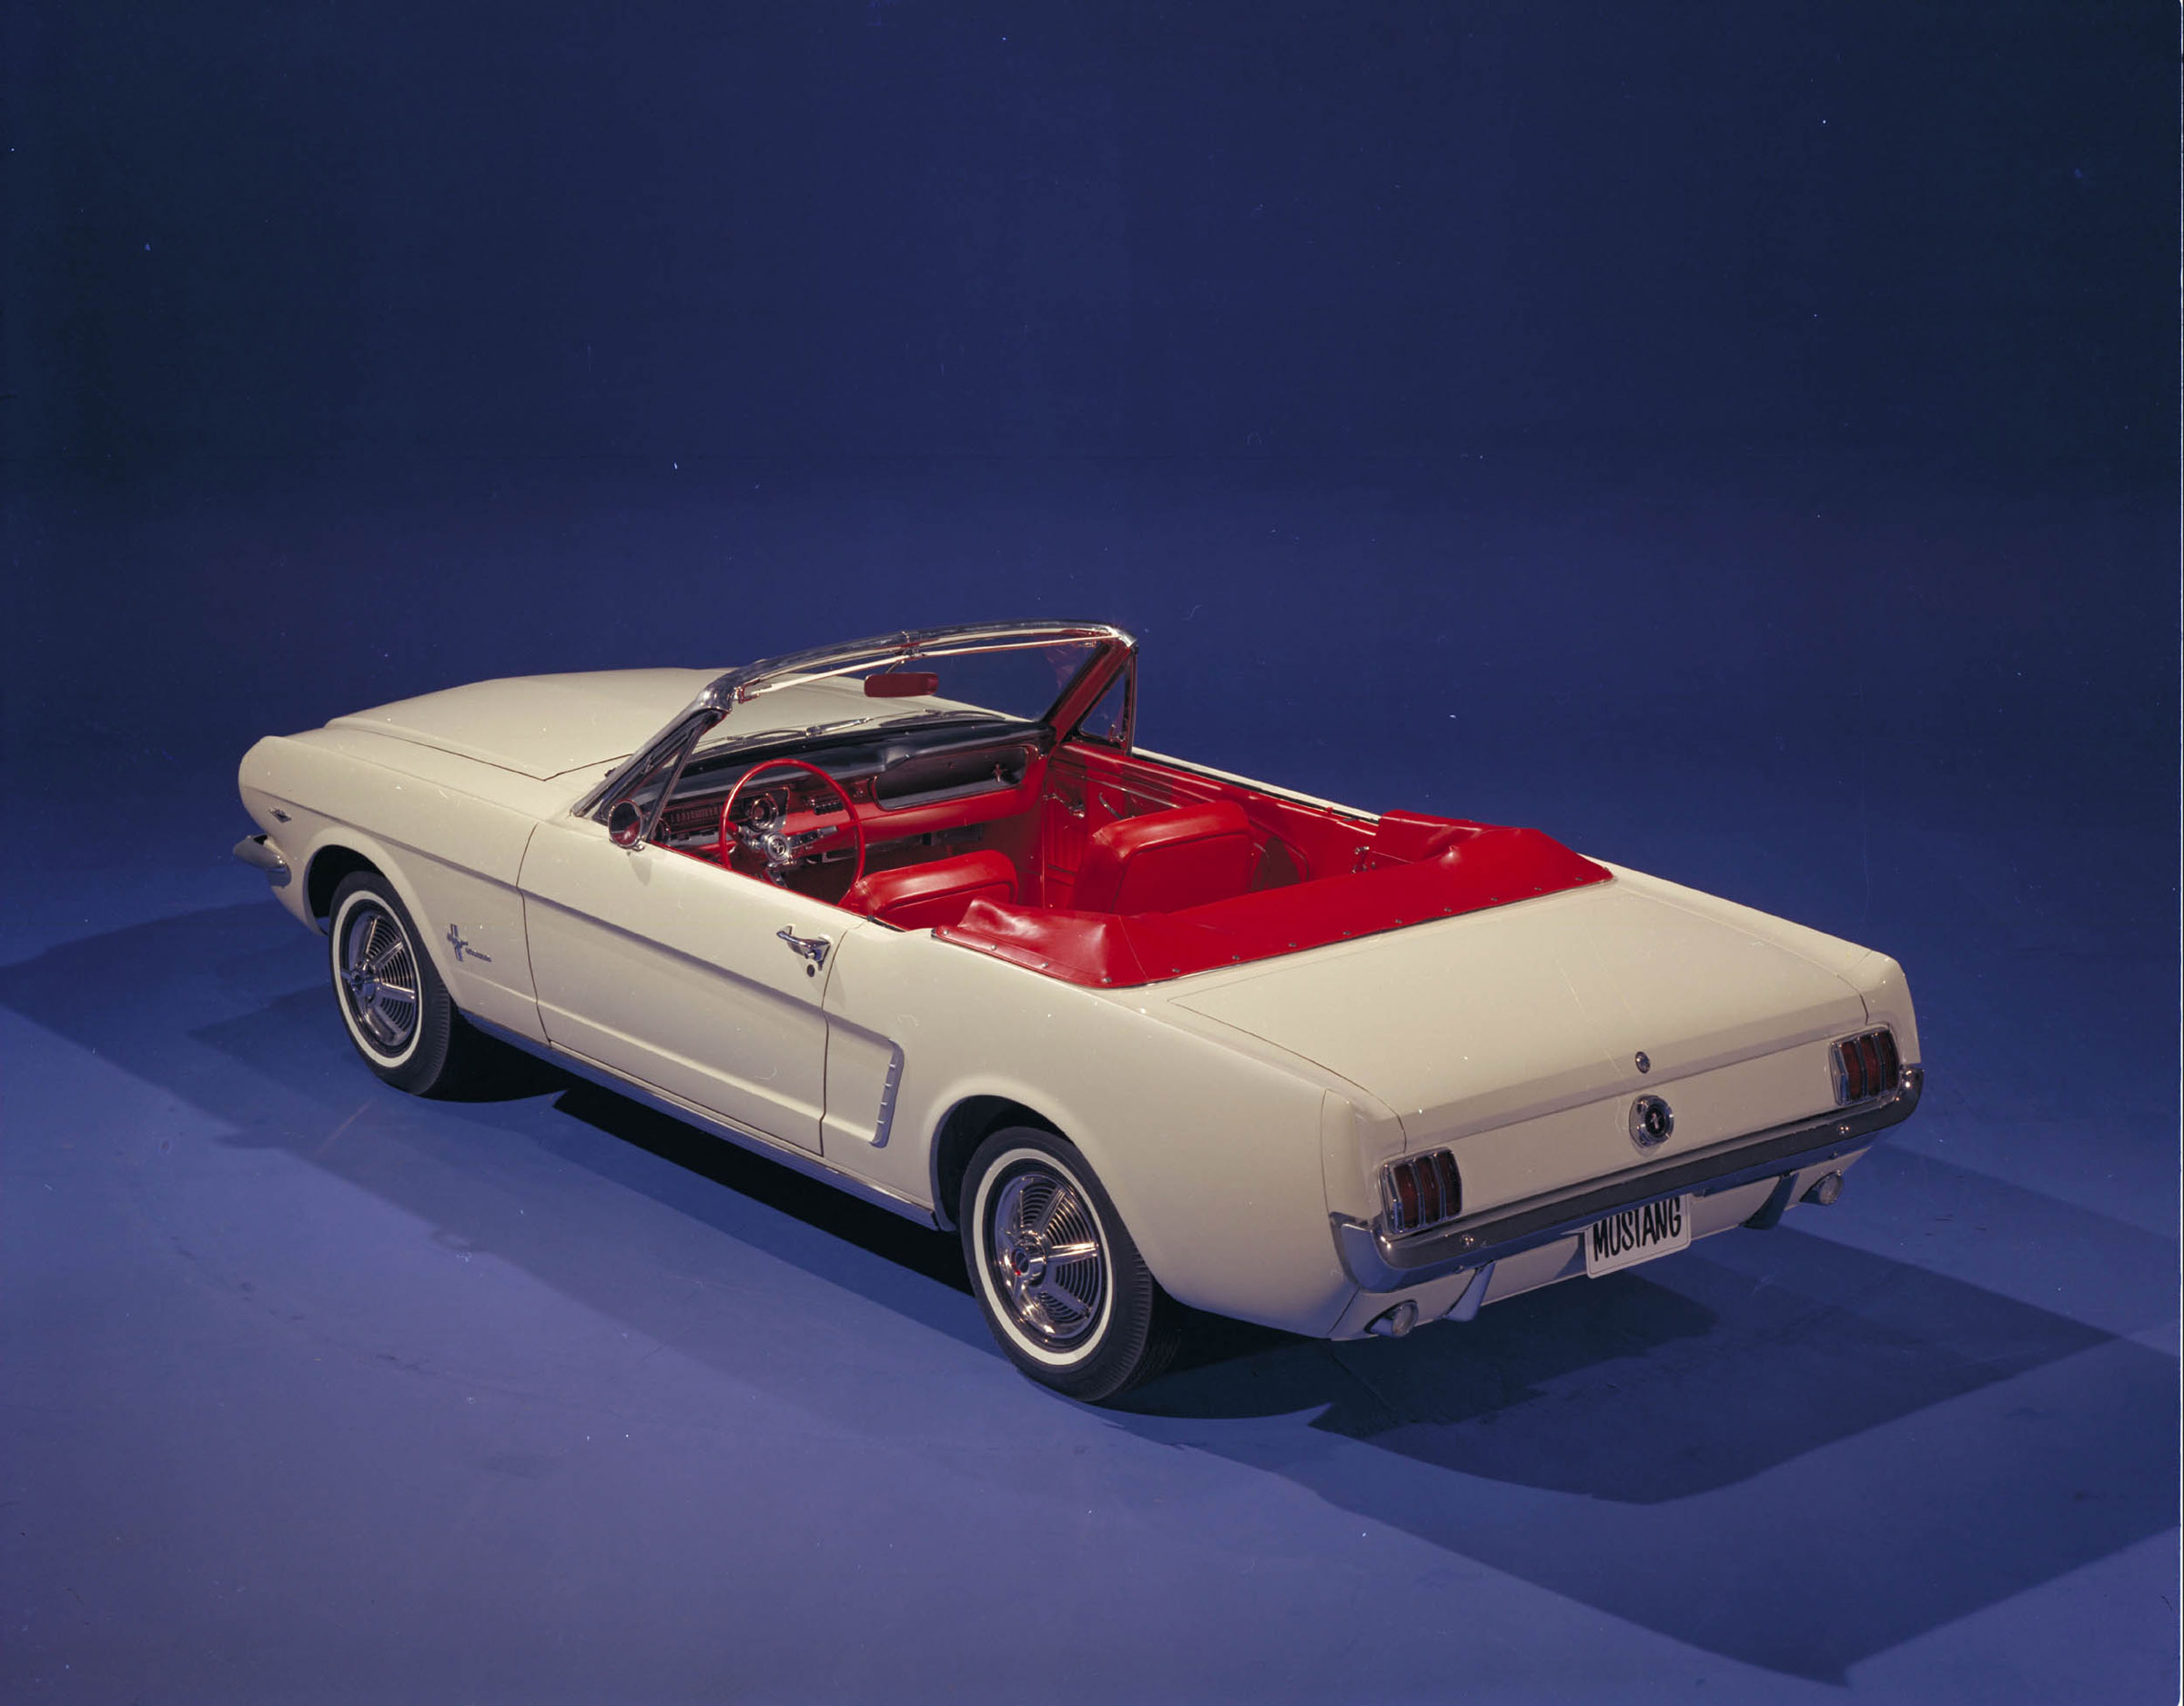 Image result for ford mustang 1964 1/2 white convertible automobilesreview.